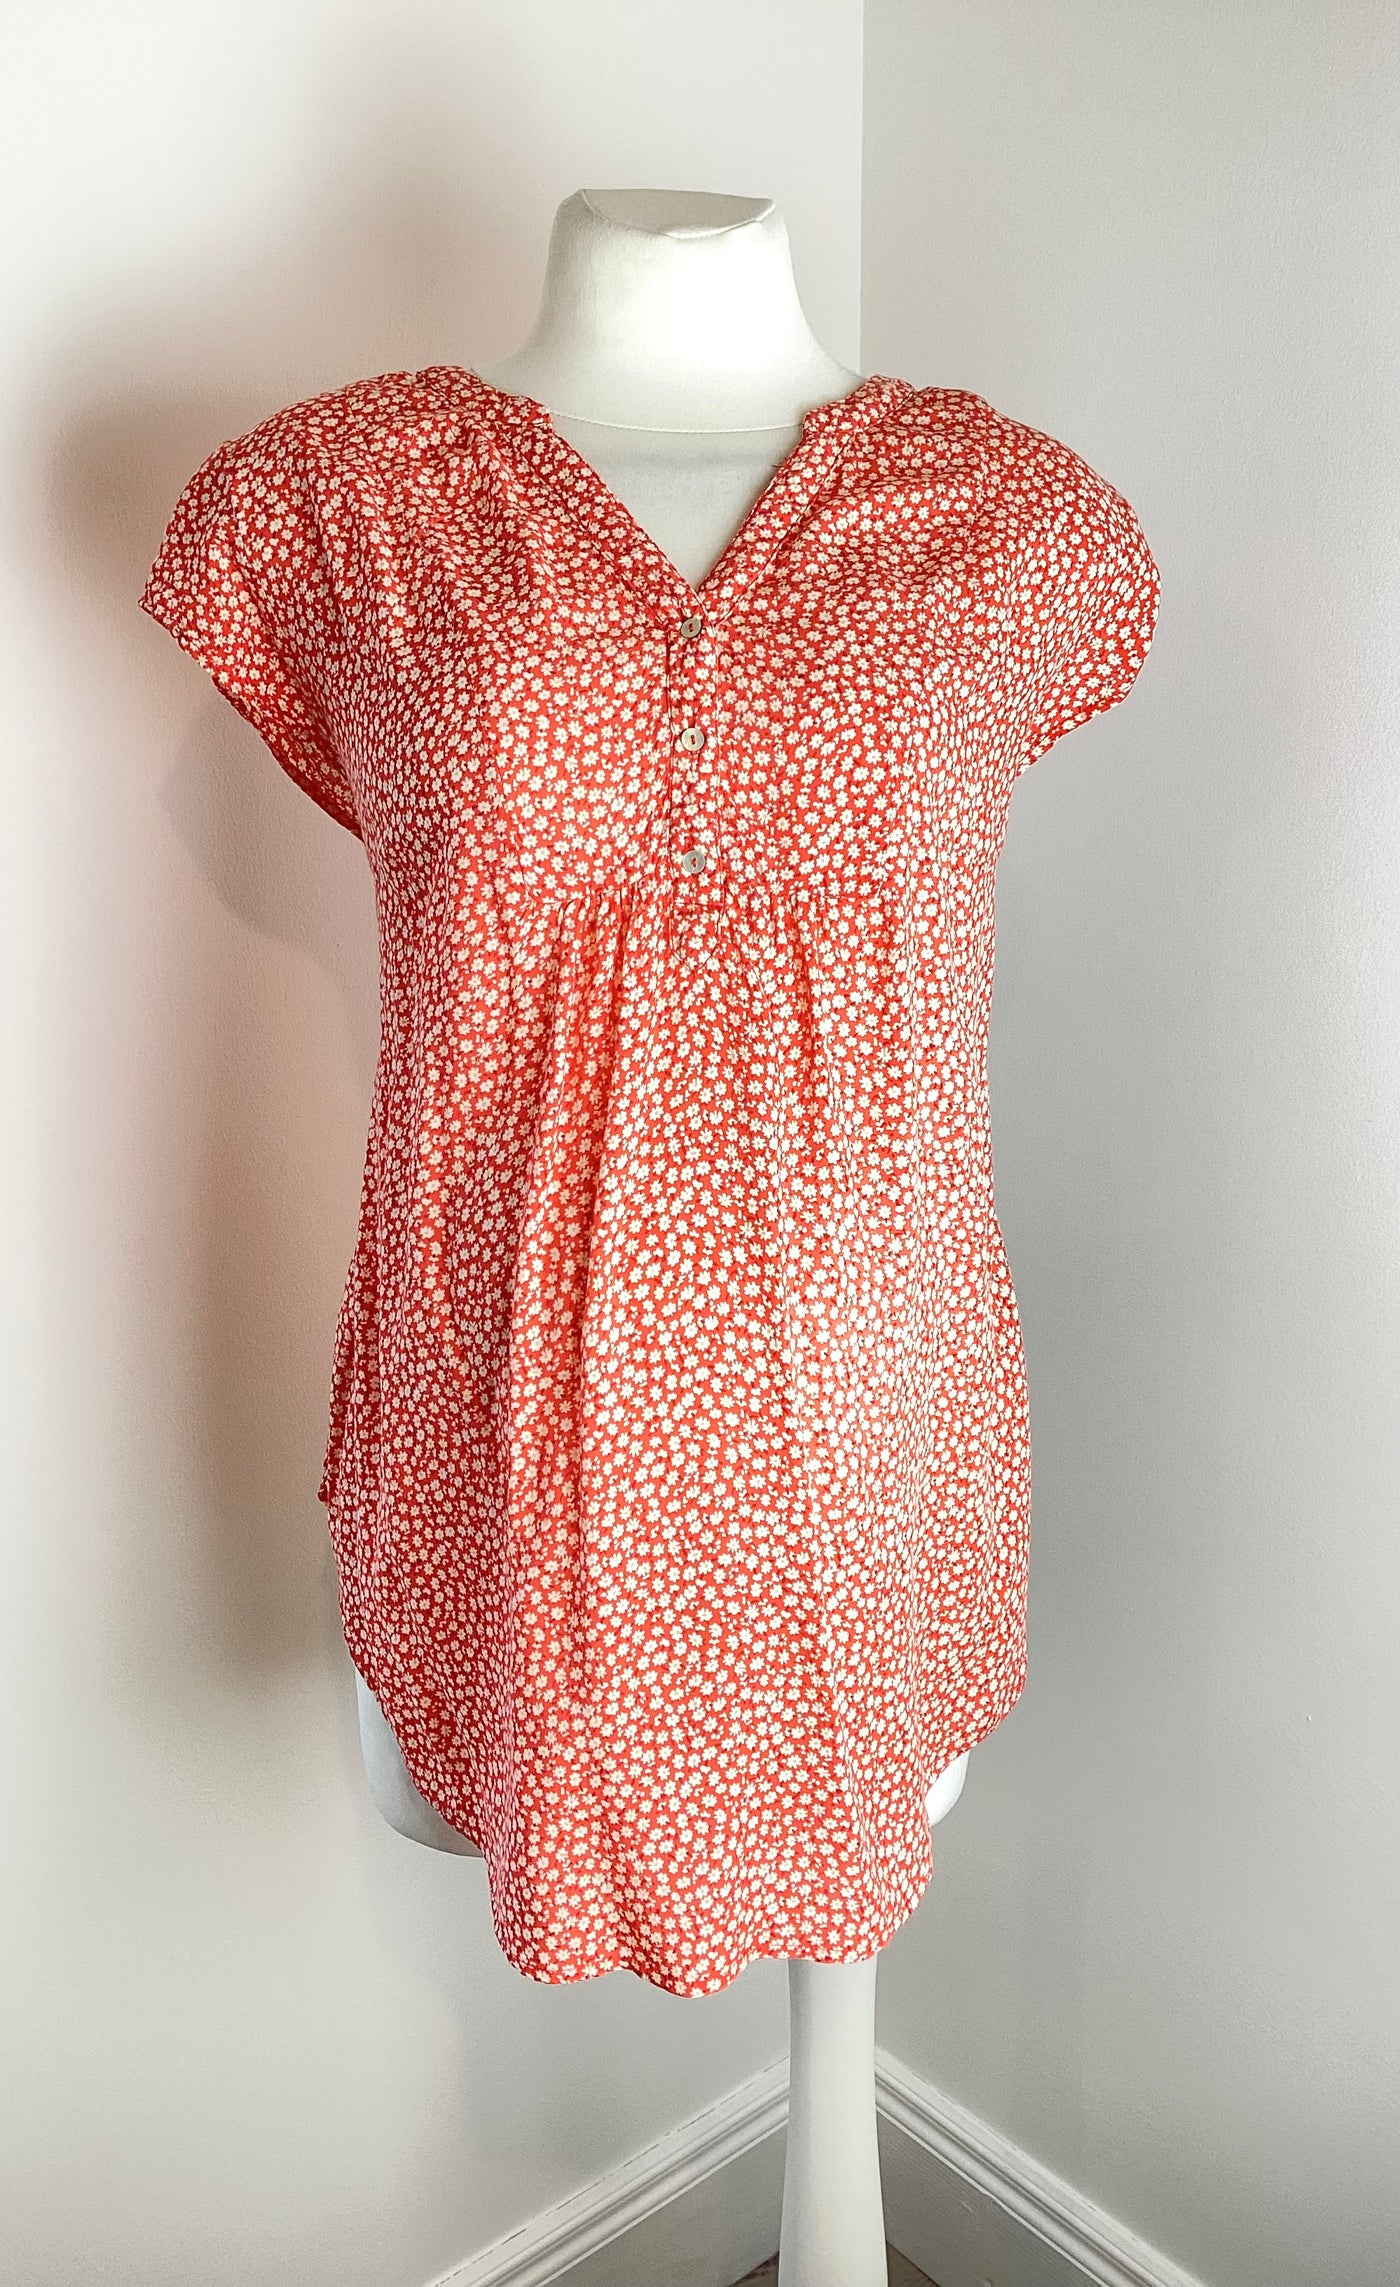 H&M Mama red & white daisy print cap sleeve blouse top - Size L (Approx UK 14/16)